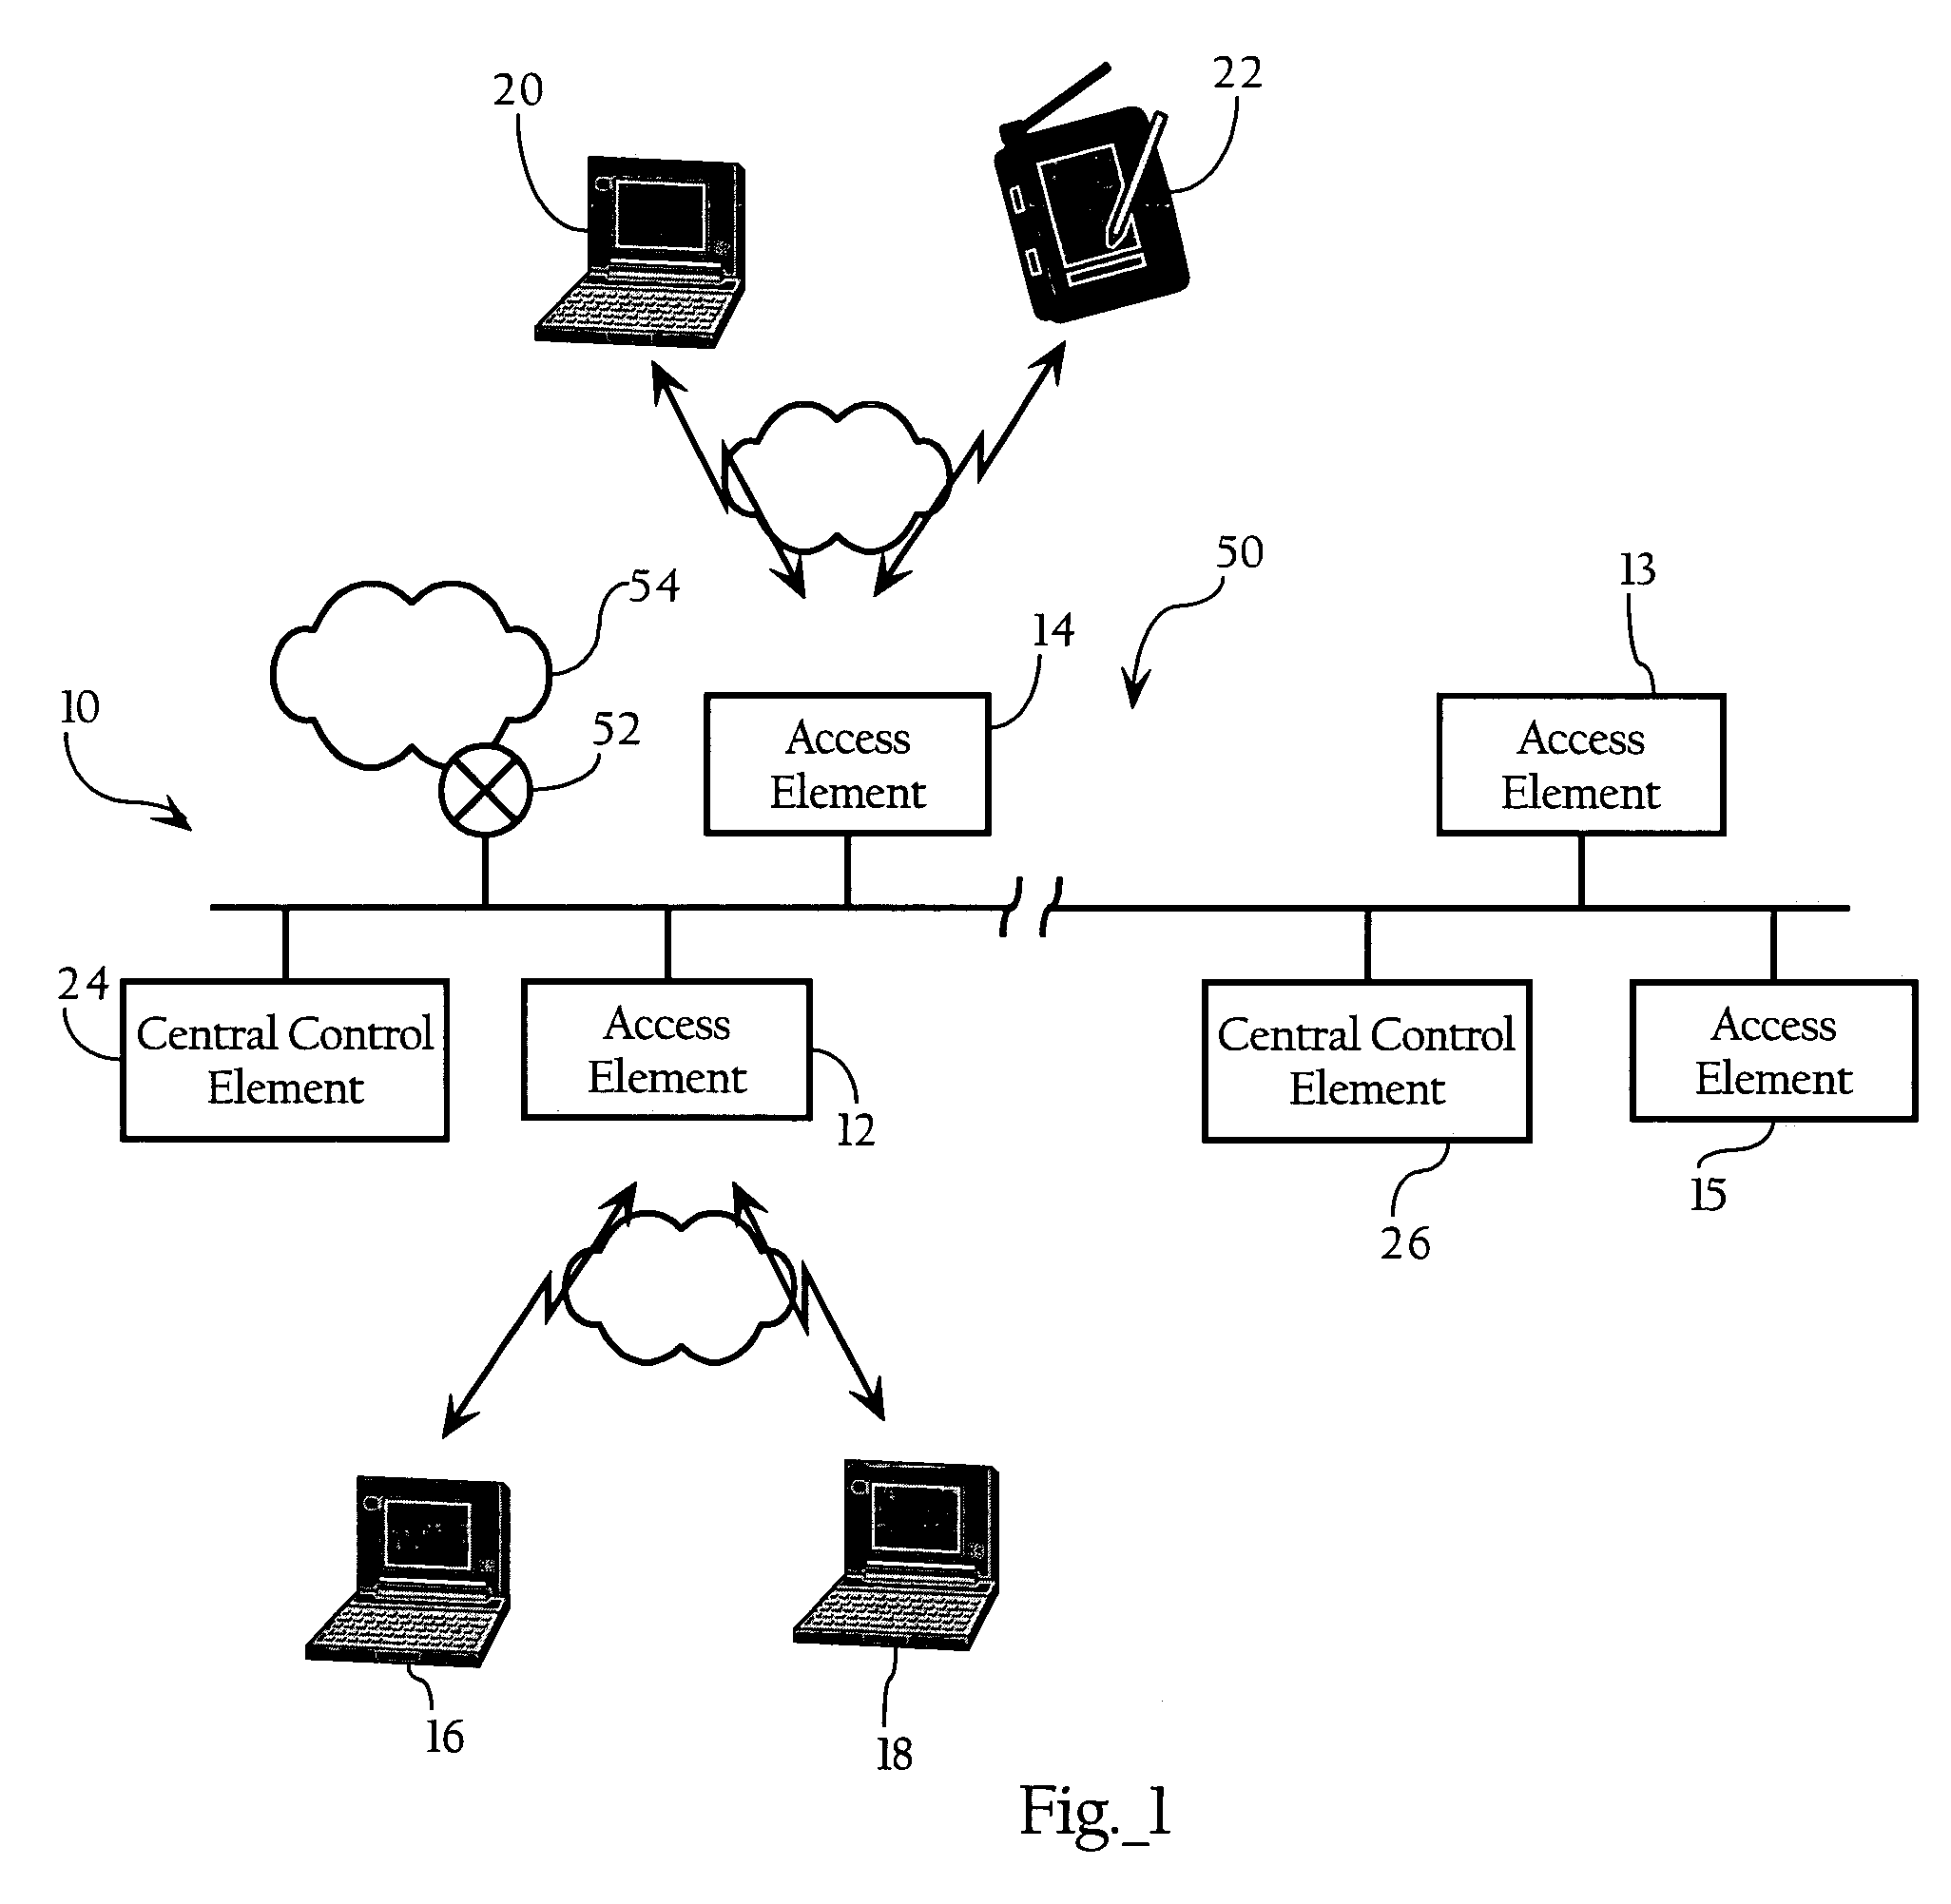 Viral wireless discovery and configuration mechanism for wireless networks